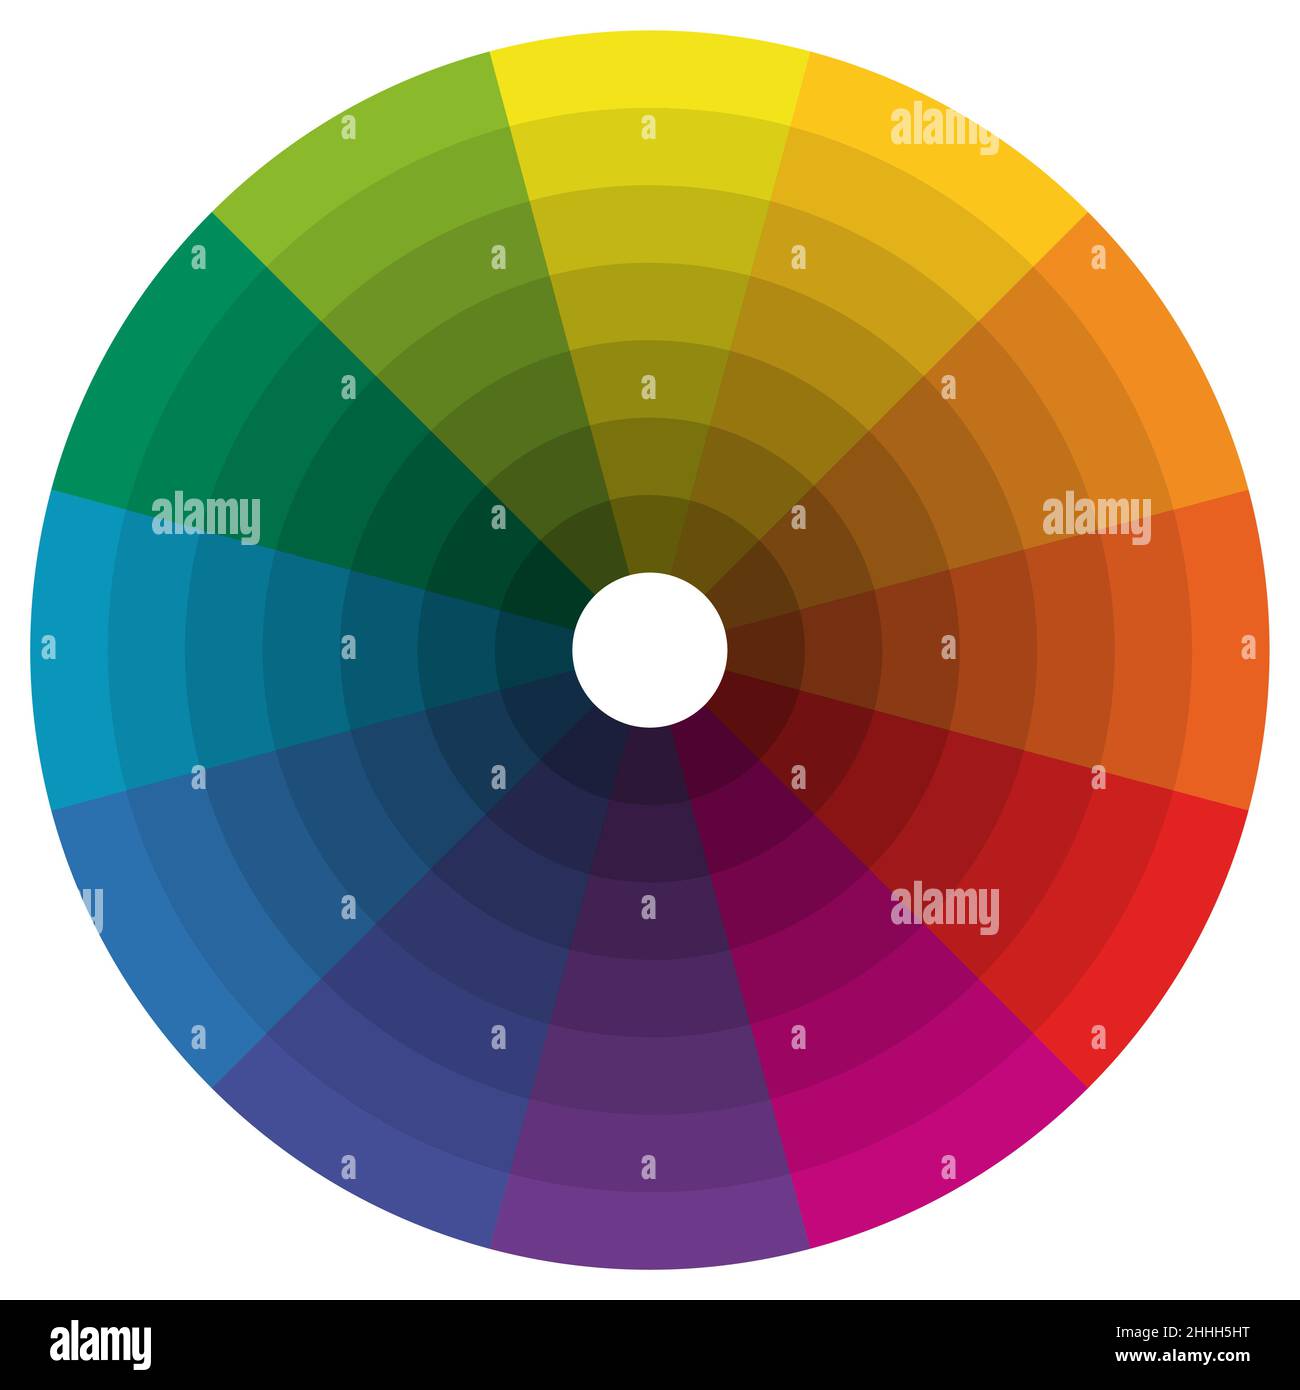 illustration of printing color wheel with different colors in gradations Stock Vector